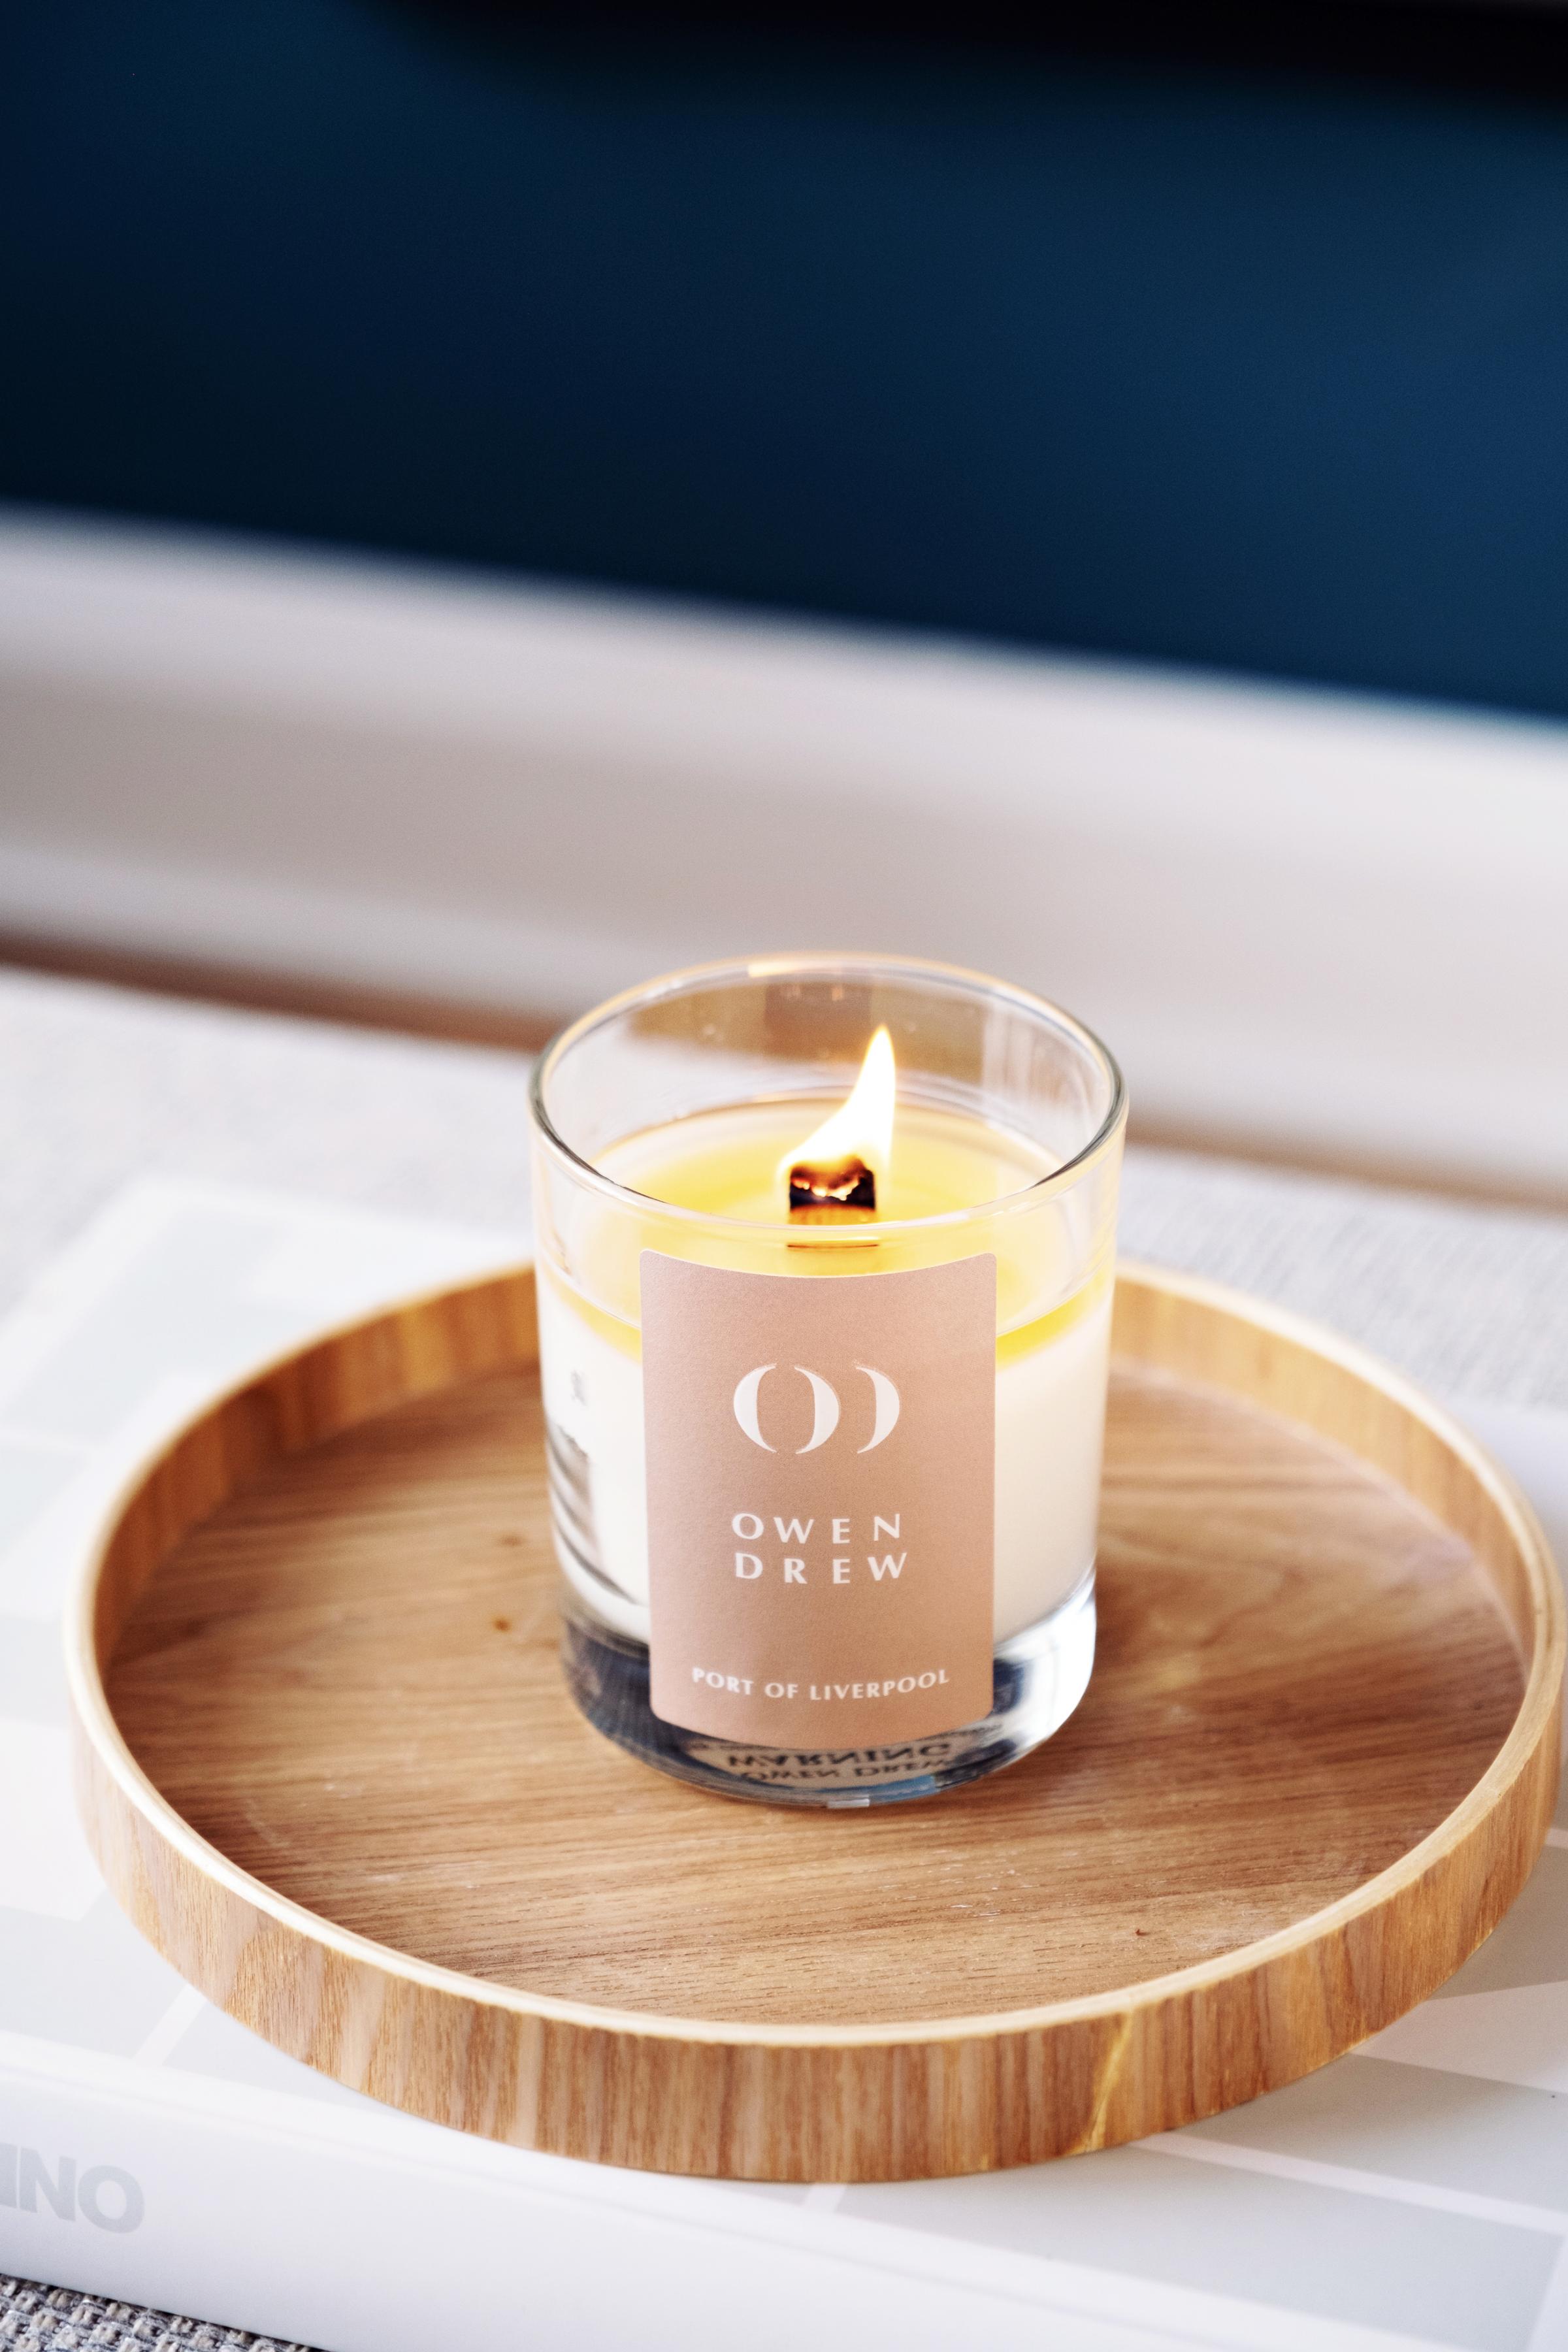 Owen Drew candles are cleaner, cruelty free and made of vegan soy wax